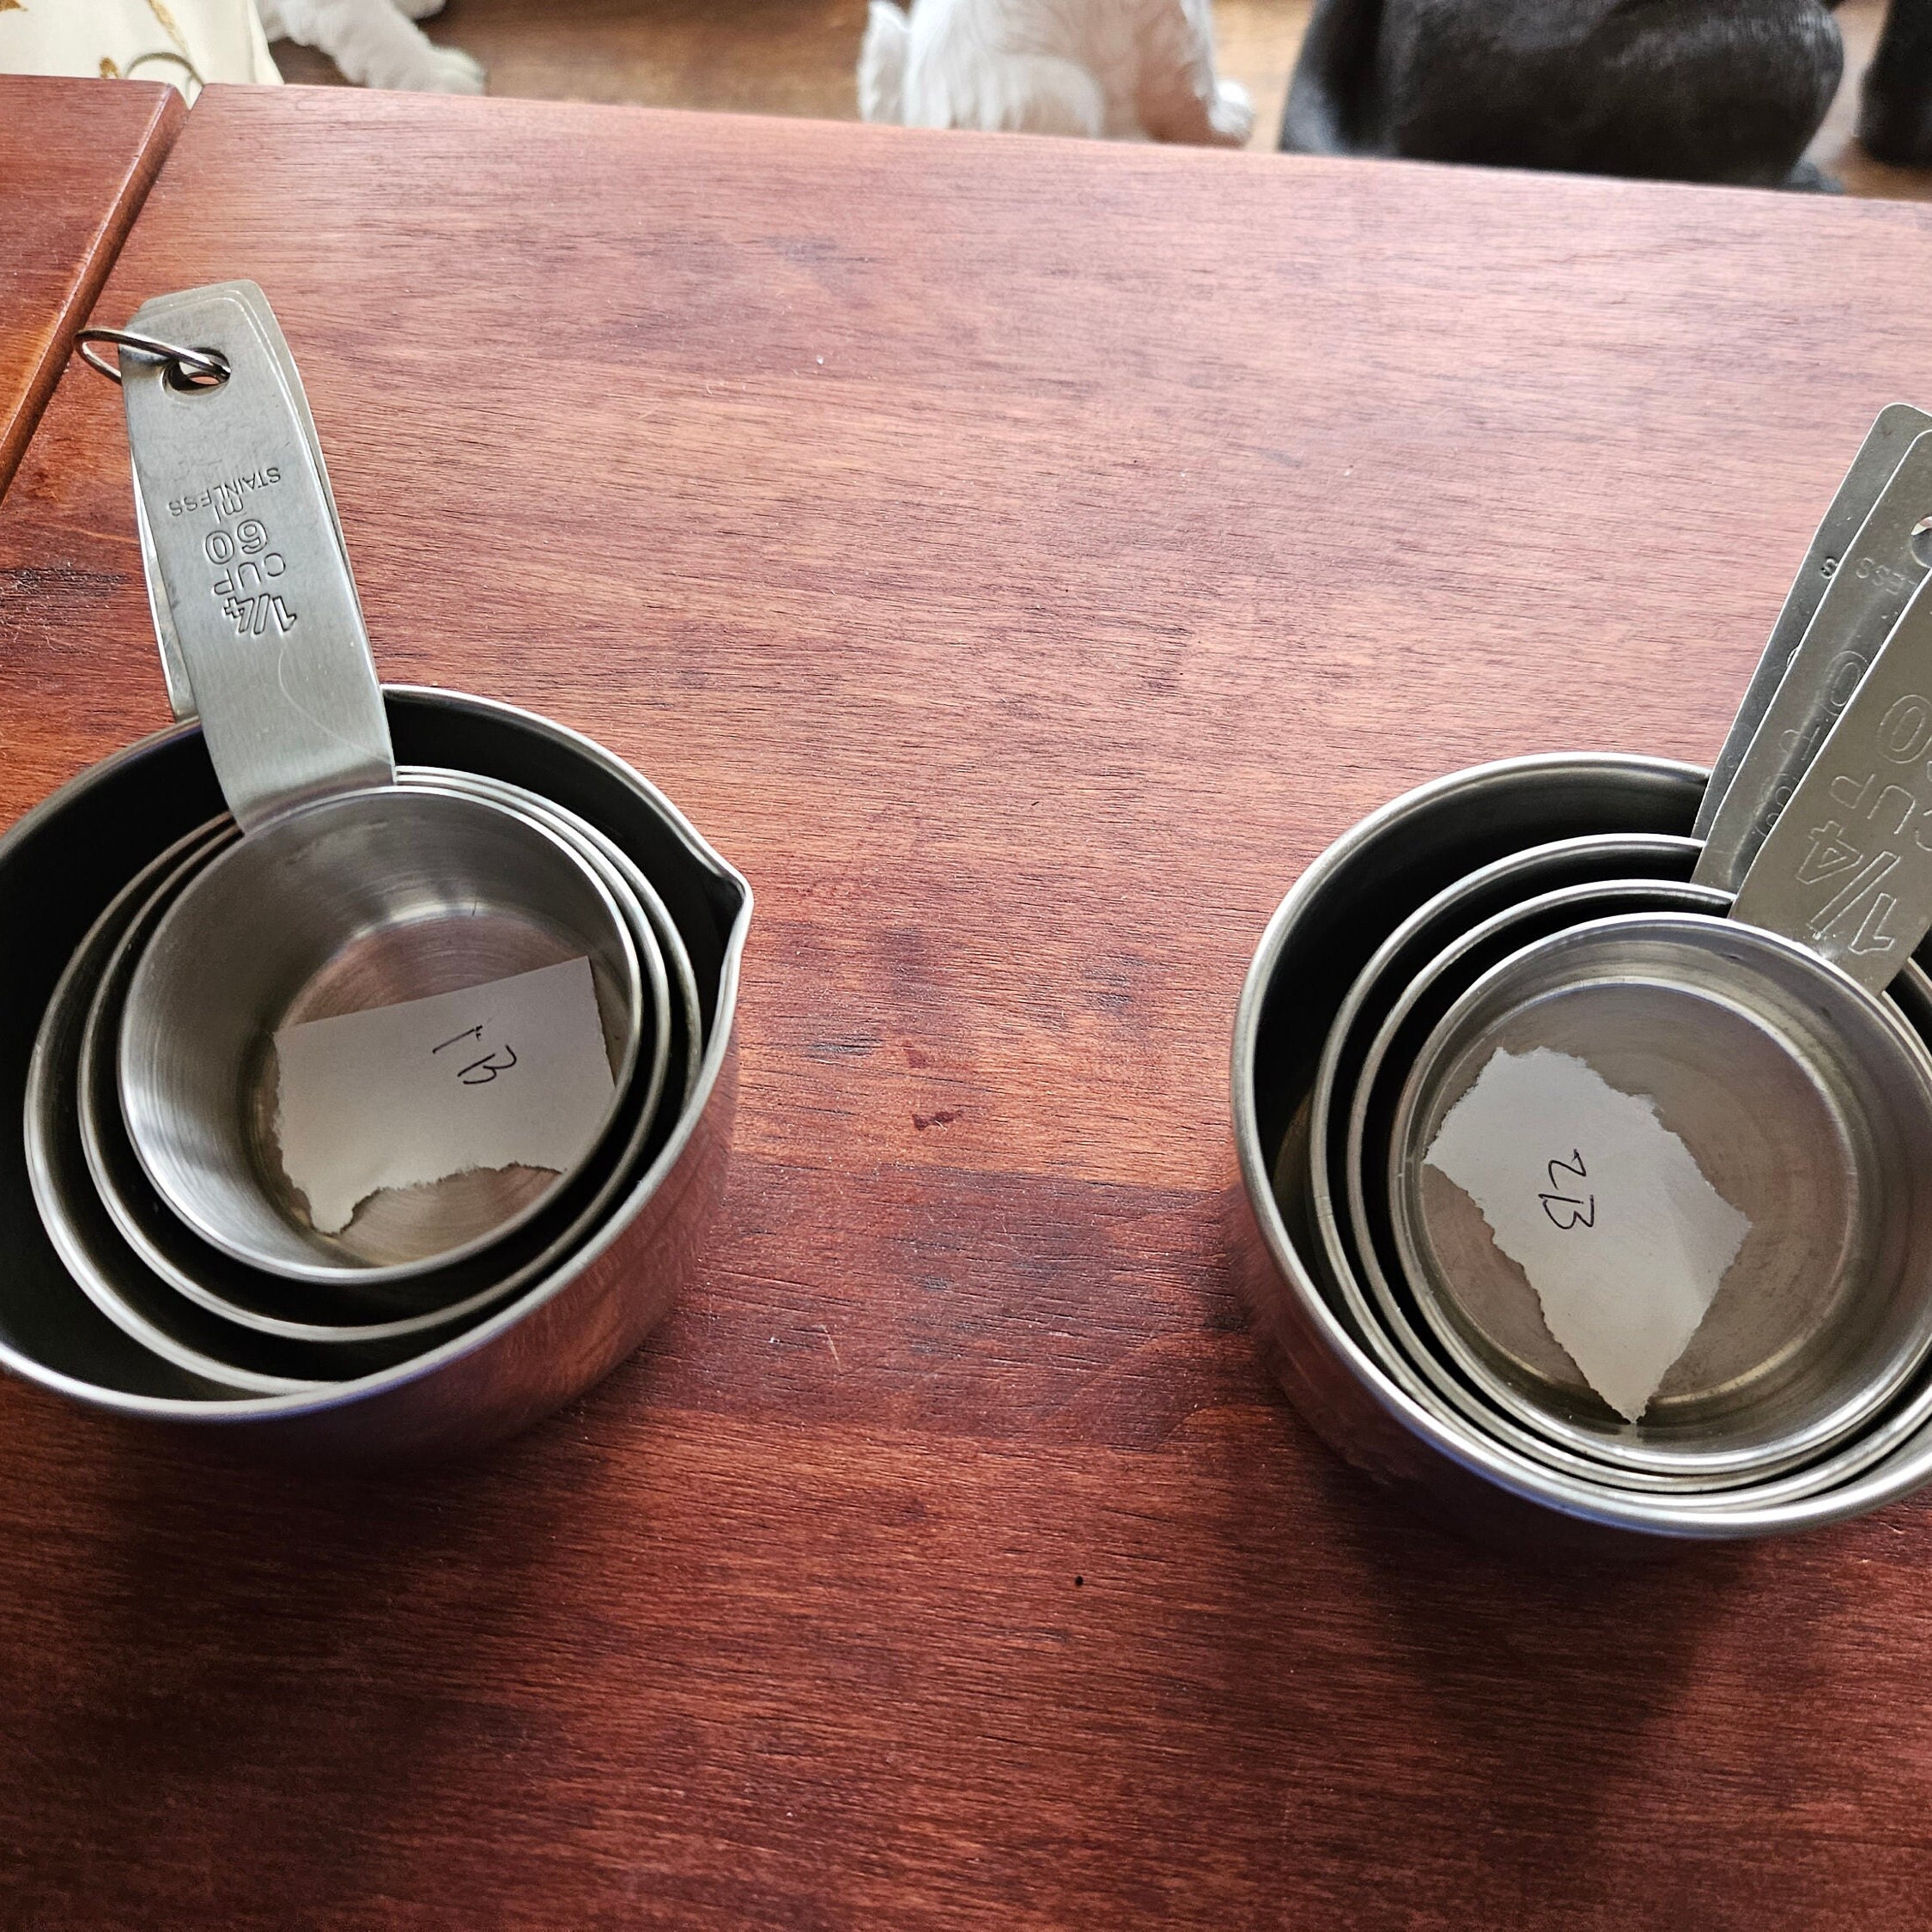 Made in Usa Measuring Cups 